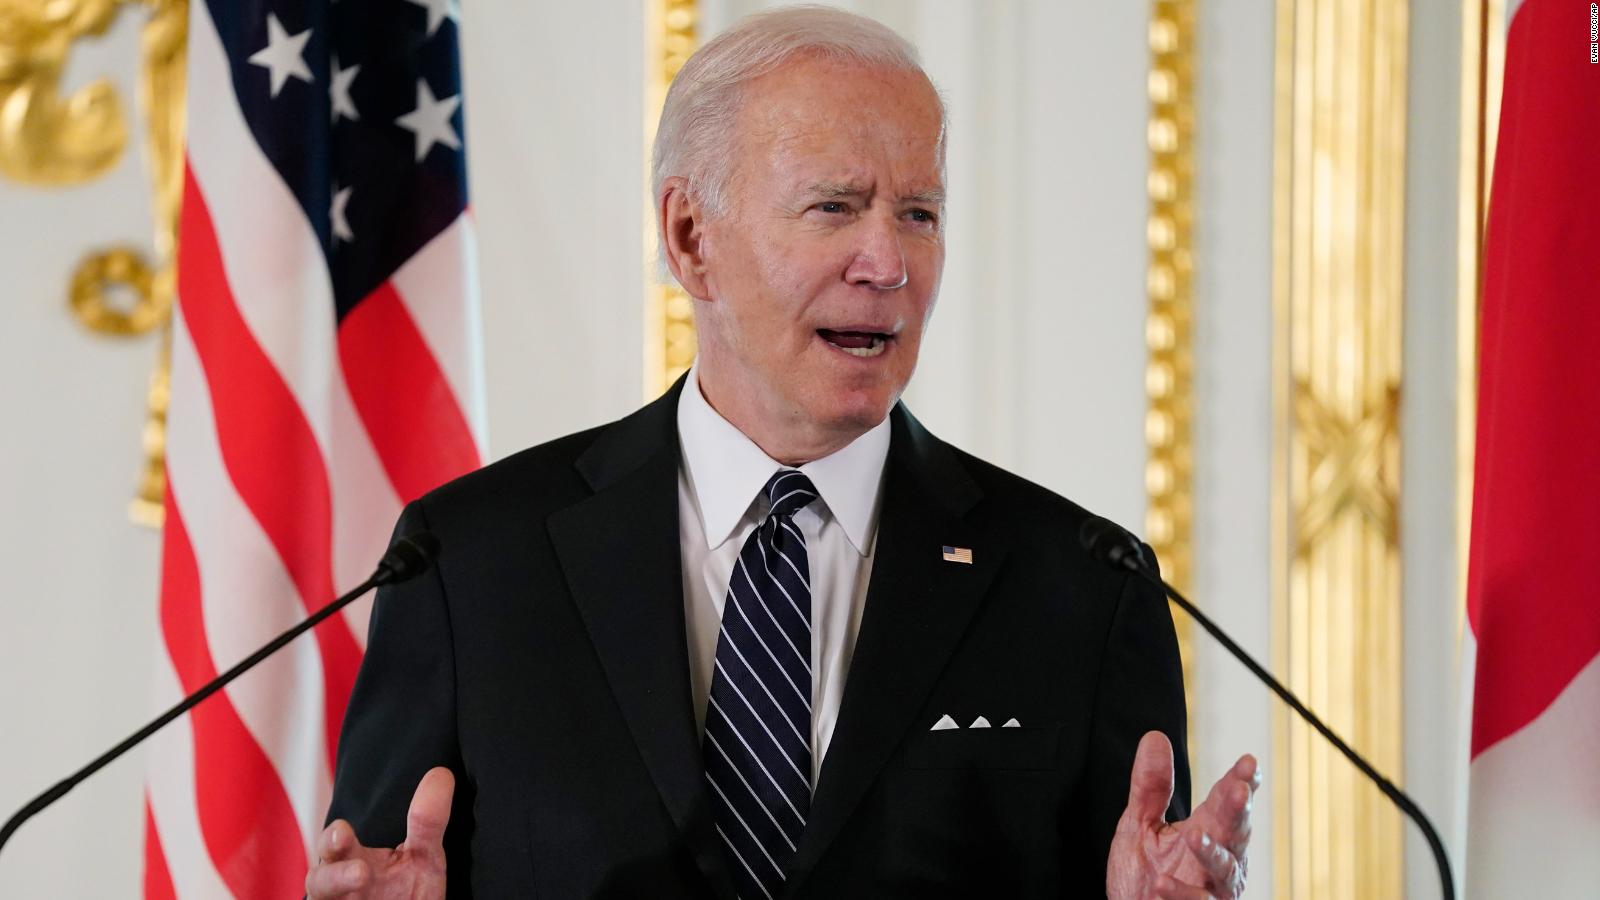 Joe Biden again says US forces would defend Taiwan from Chinese attack (theguardian.com)